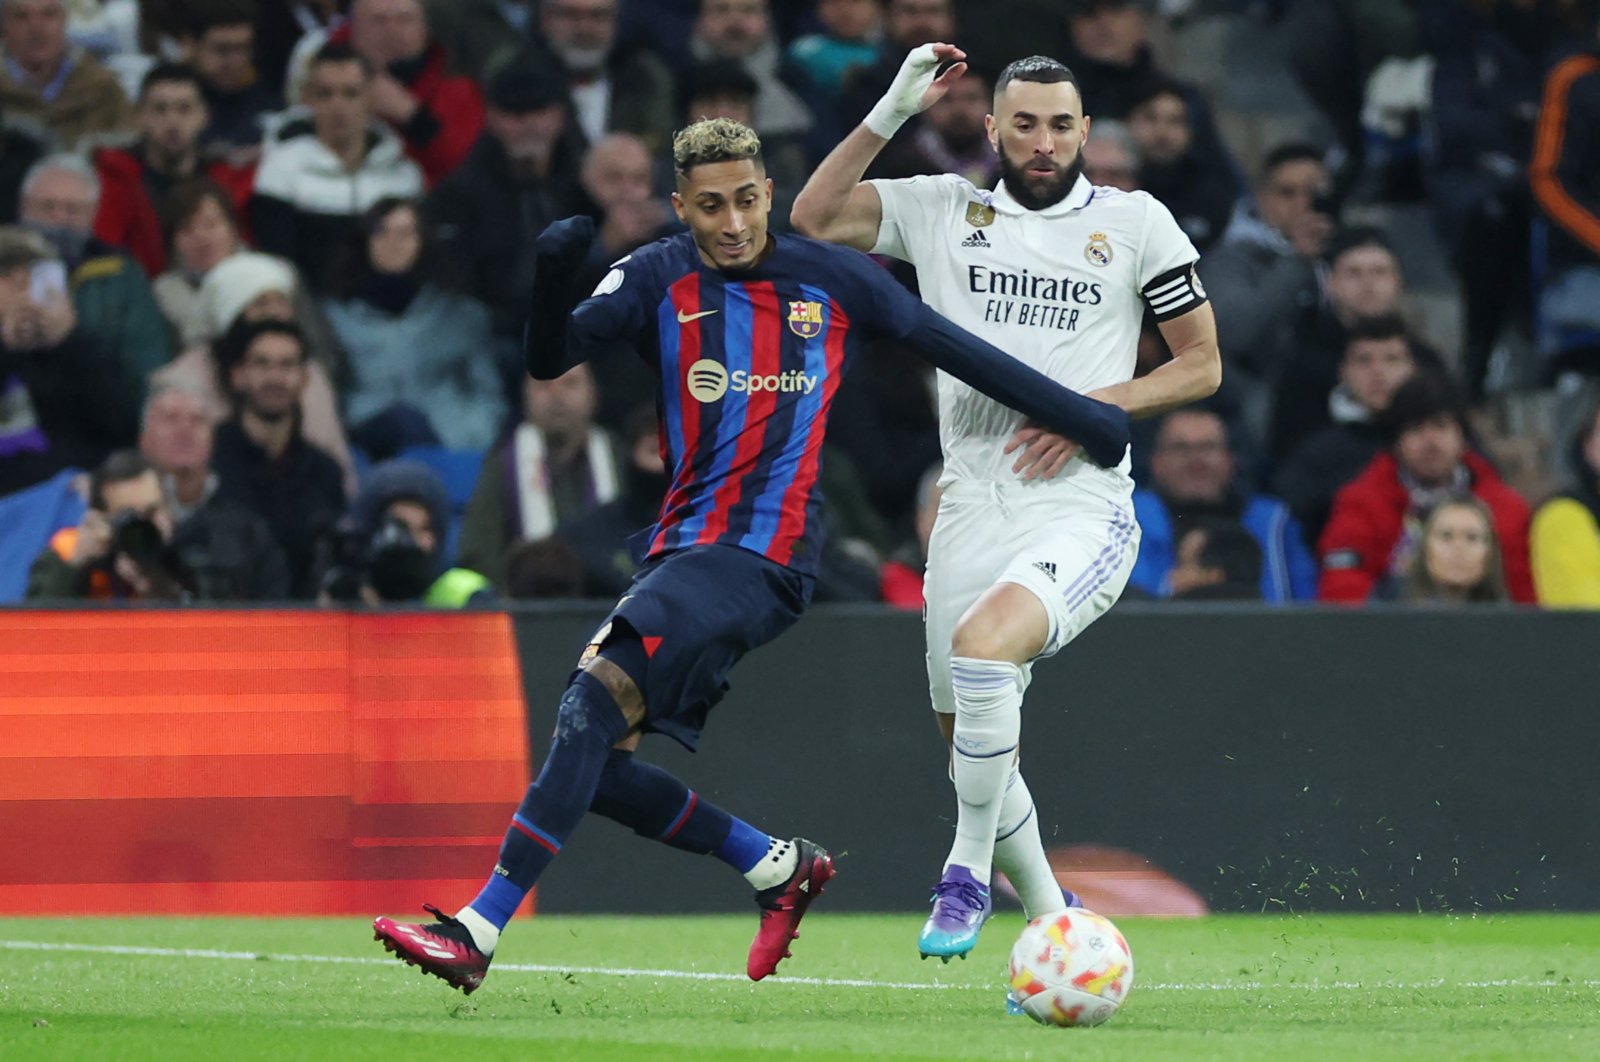 Barcelona&#039;s Brazilian forward Raphinha (L) vies with Real Madrid&#039;s French forward Karim Benzema during the Copa del Rey (King&#039;s Cup) semifinal first leg football match at the Santiago Bernabeu stadium, Madrid, Spain, March 2, 2023. (AFP Photo)